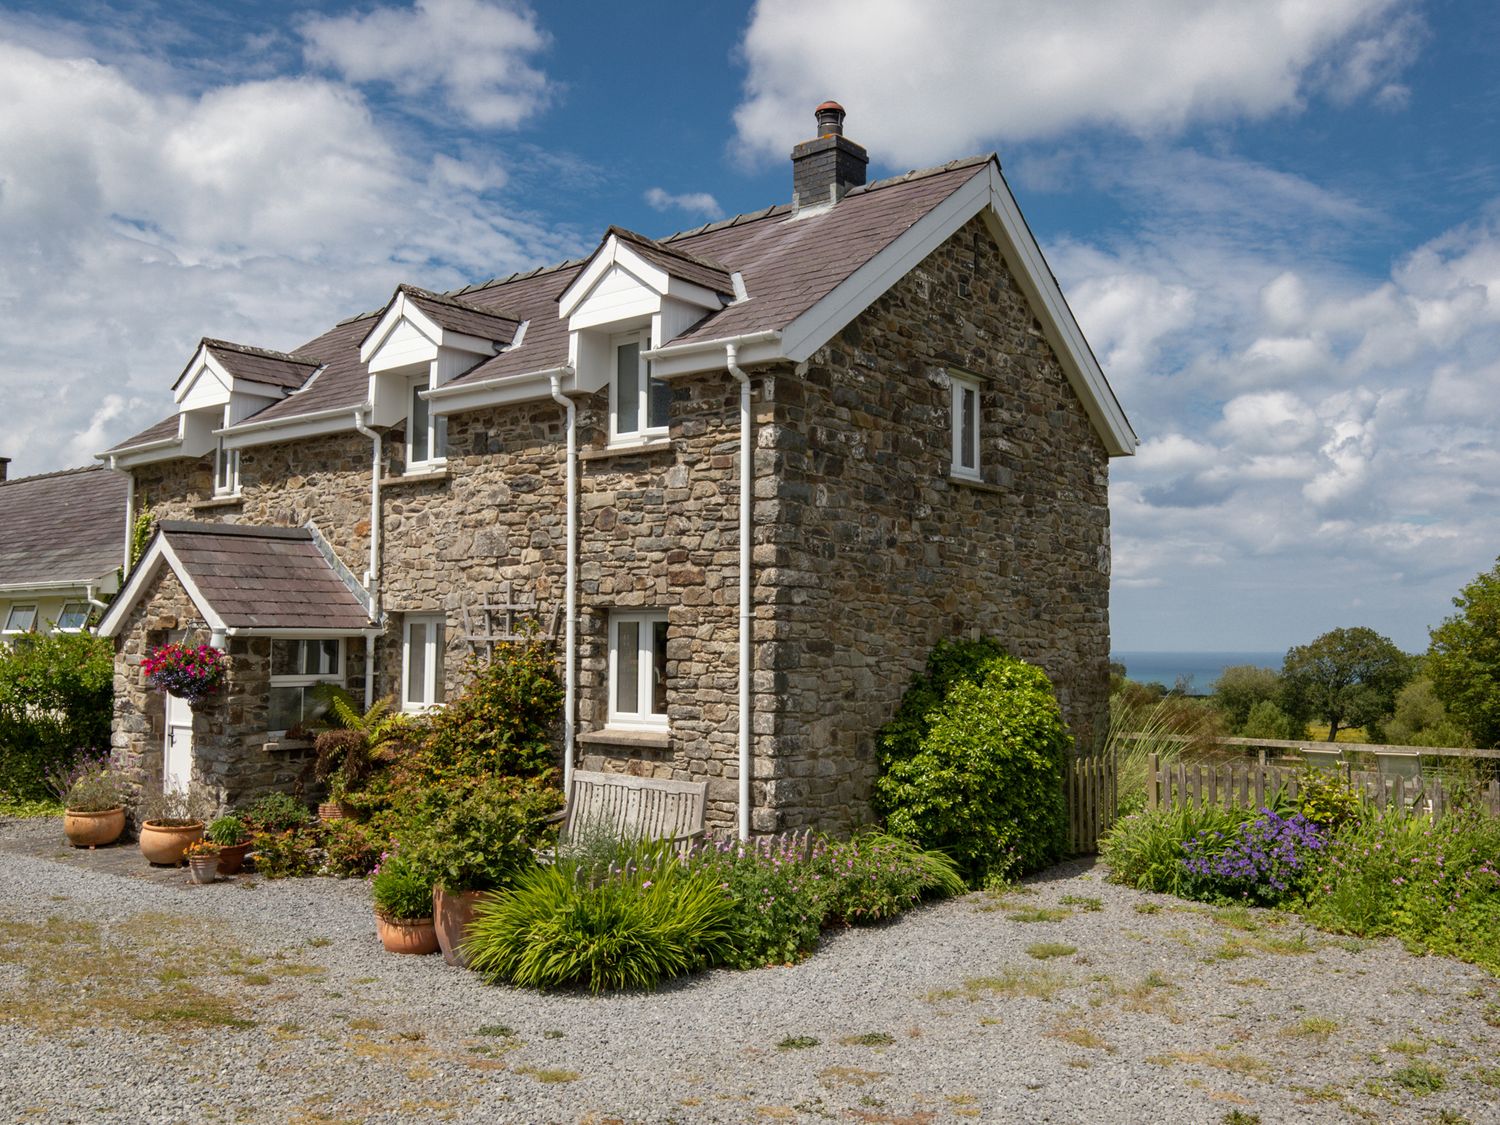 Stable Cottage - Mid Wales - 1150088 - photo 1